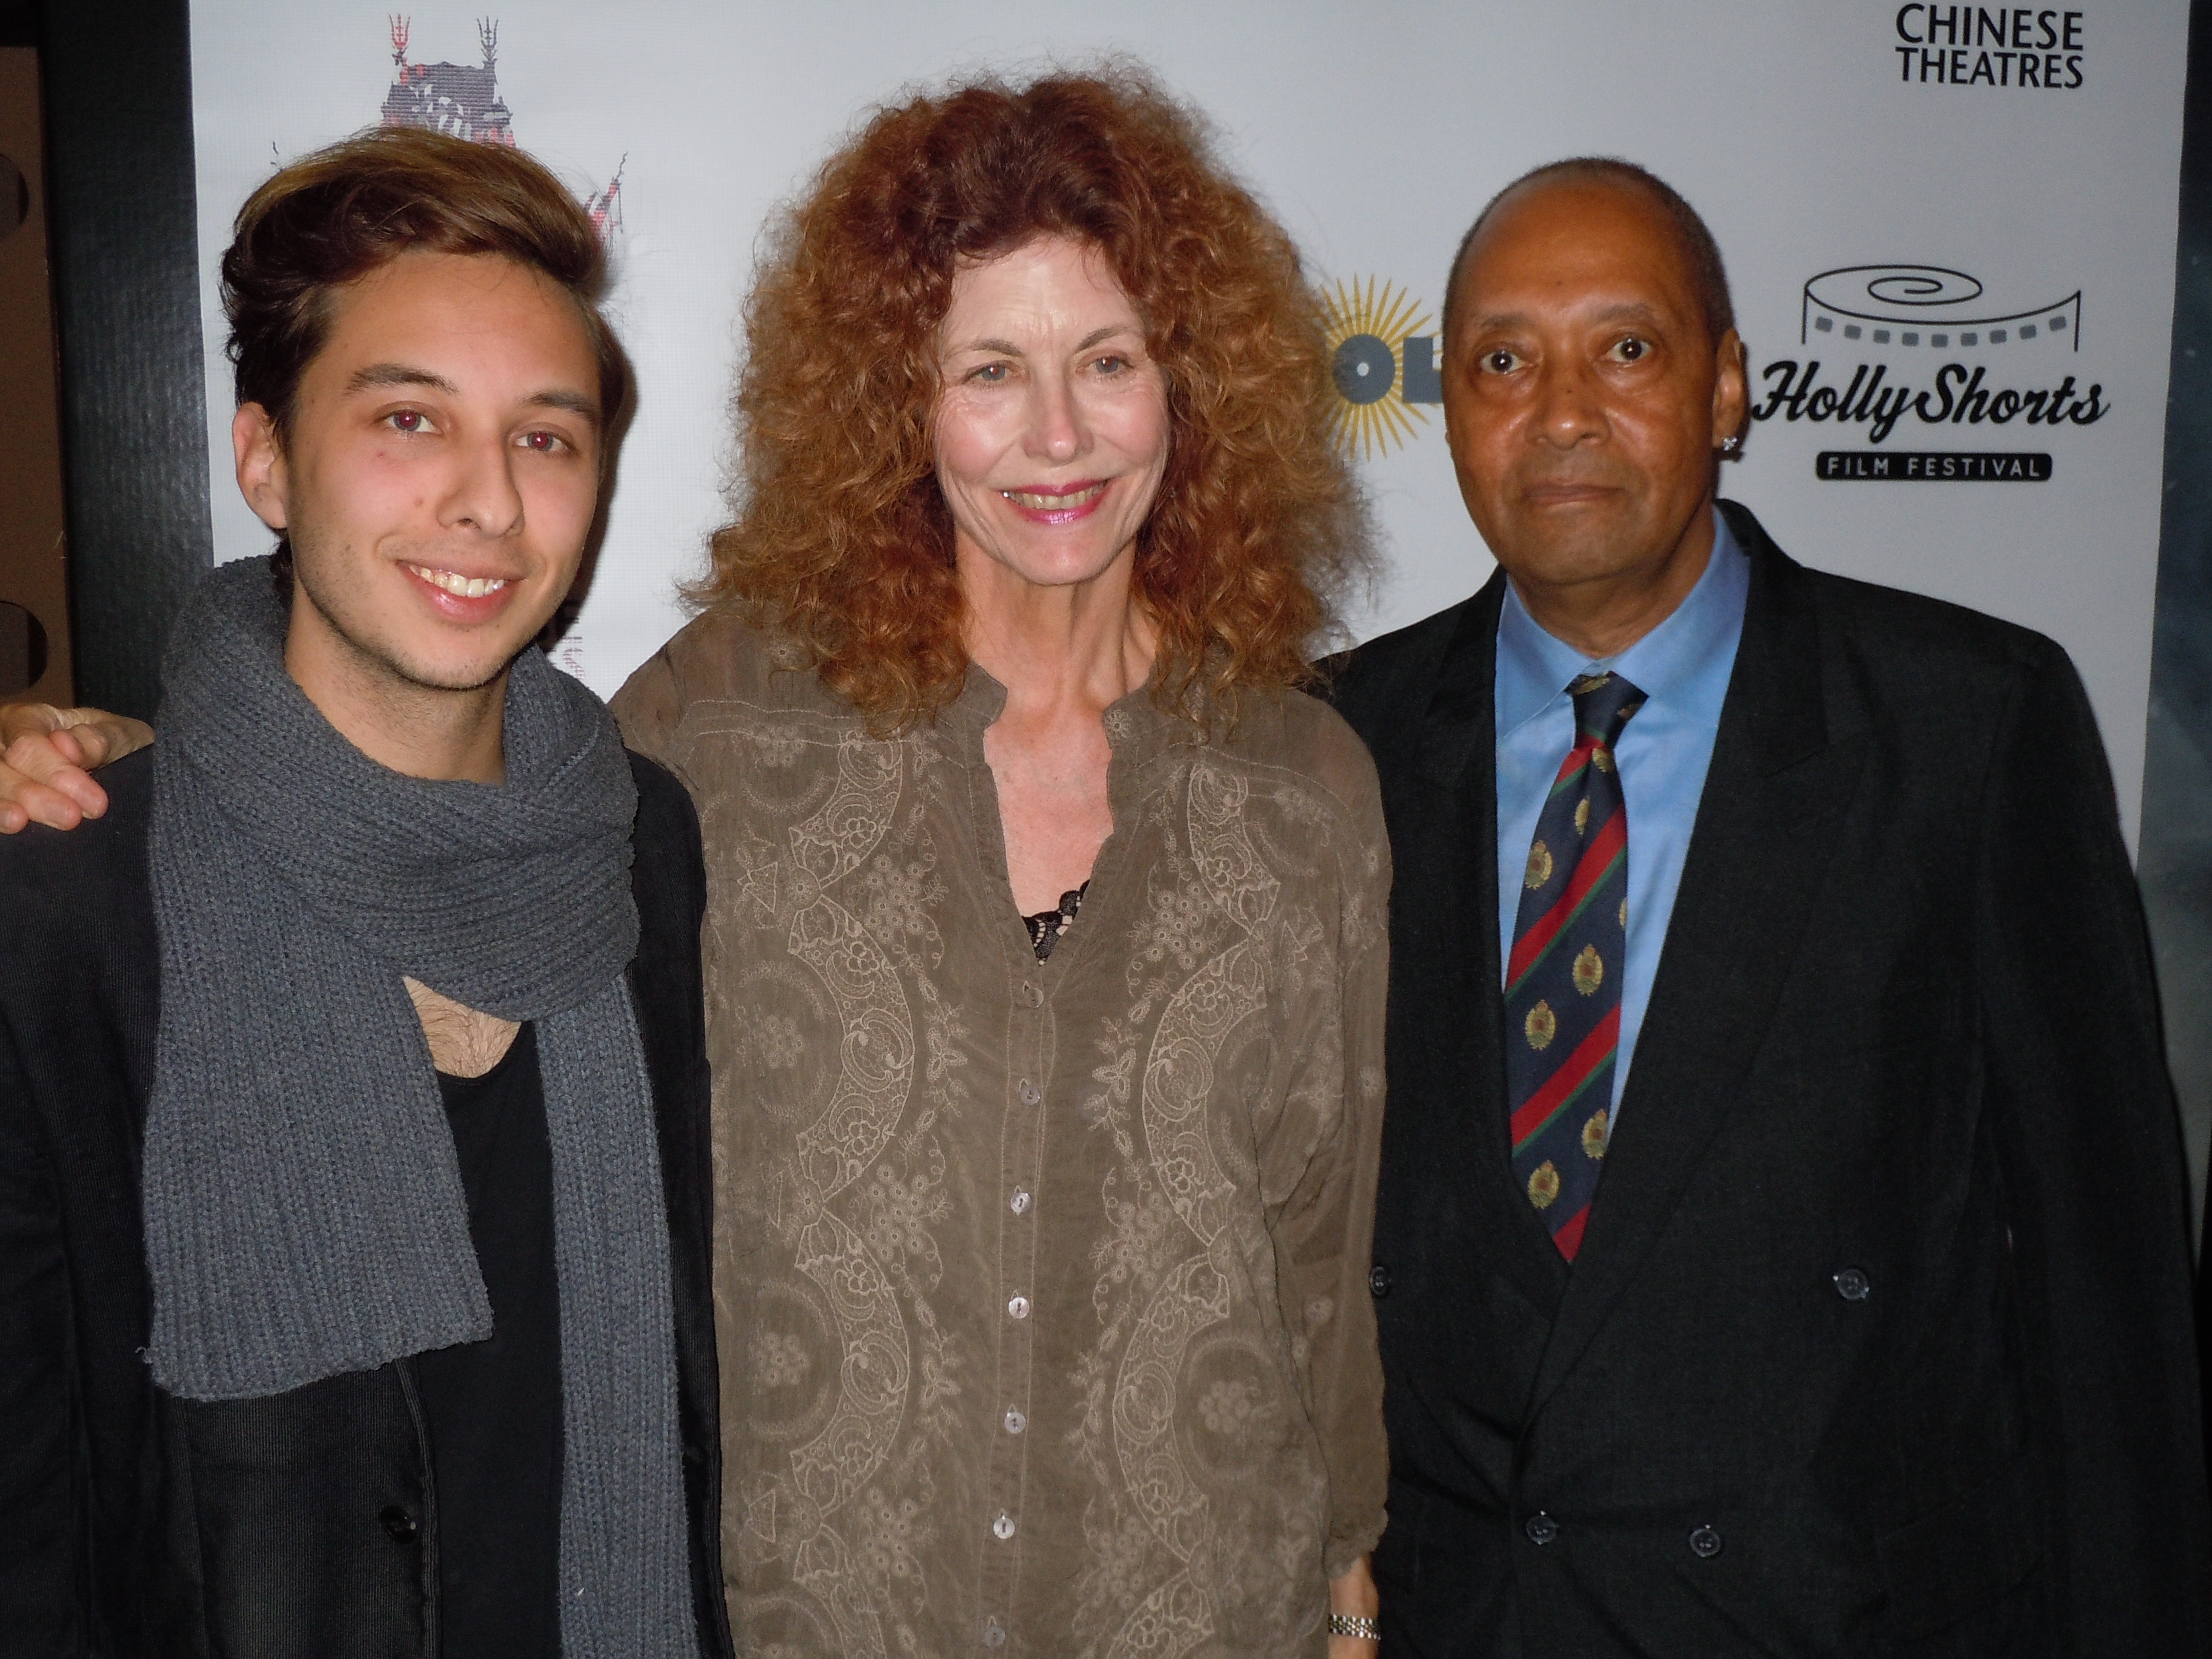 Enrique Pedraza, Vivienne Powell, and Jimmy at event of Song From A Blackbird (2014)